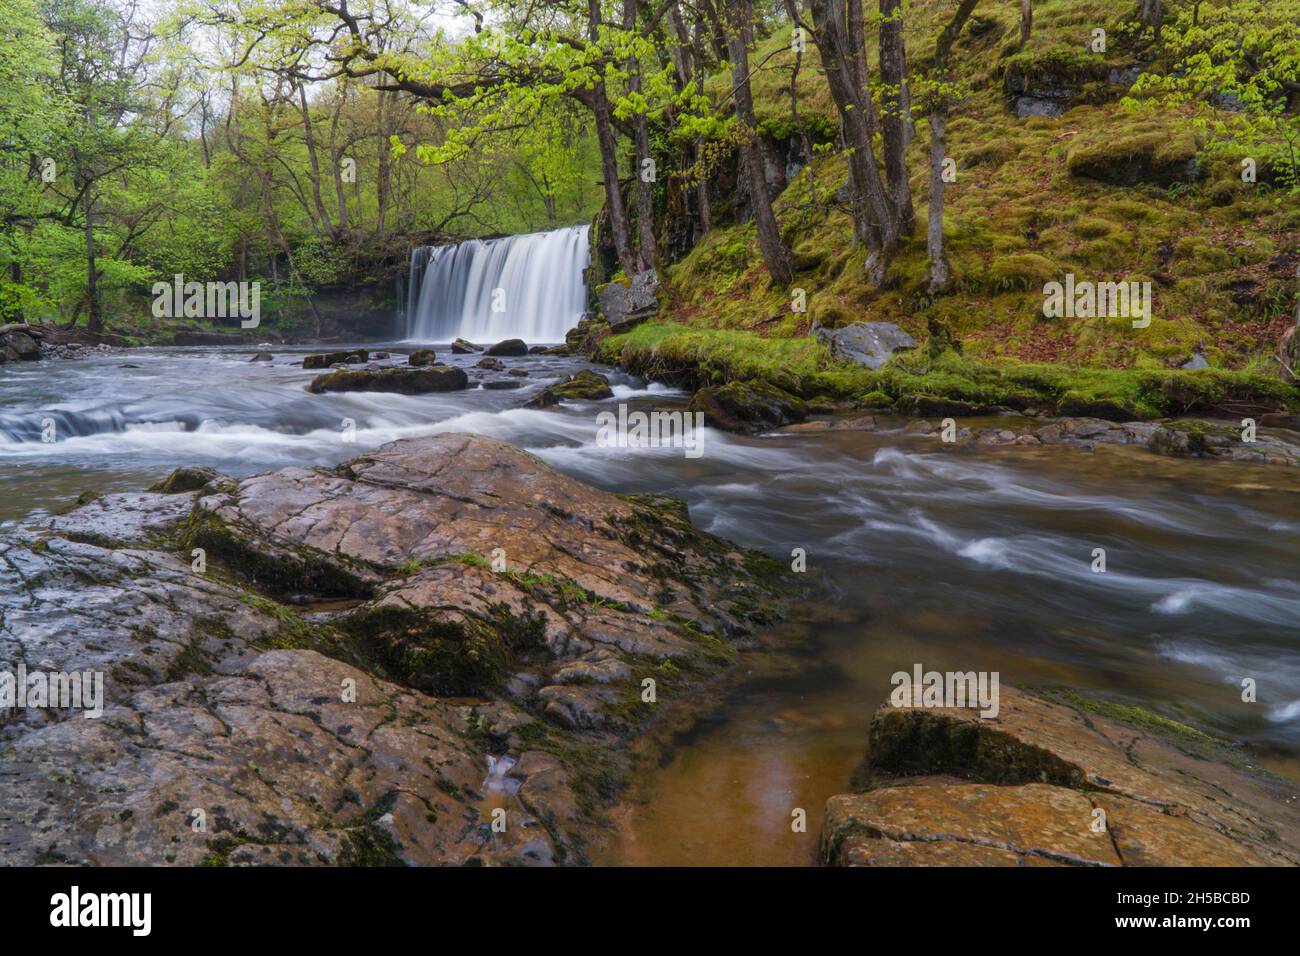 Upper Gushing Falls/Sgwd Ddwli Uchaf on the Nedd Fechan river in the Brecon Beacons national Park Brecknockshire Wales UK Stock Photo